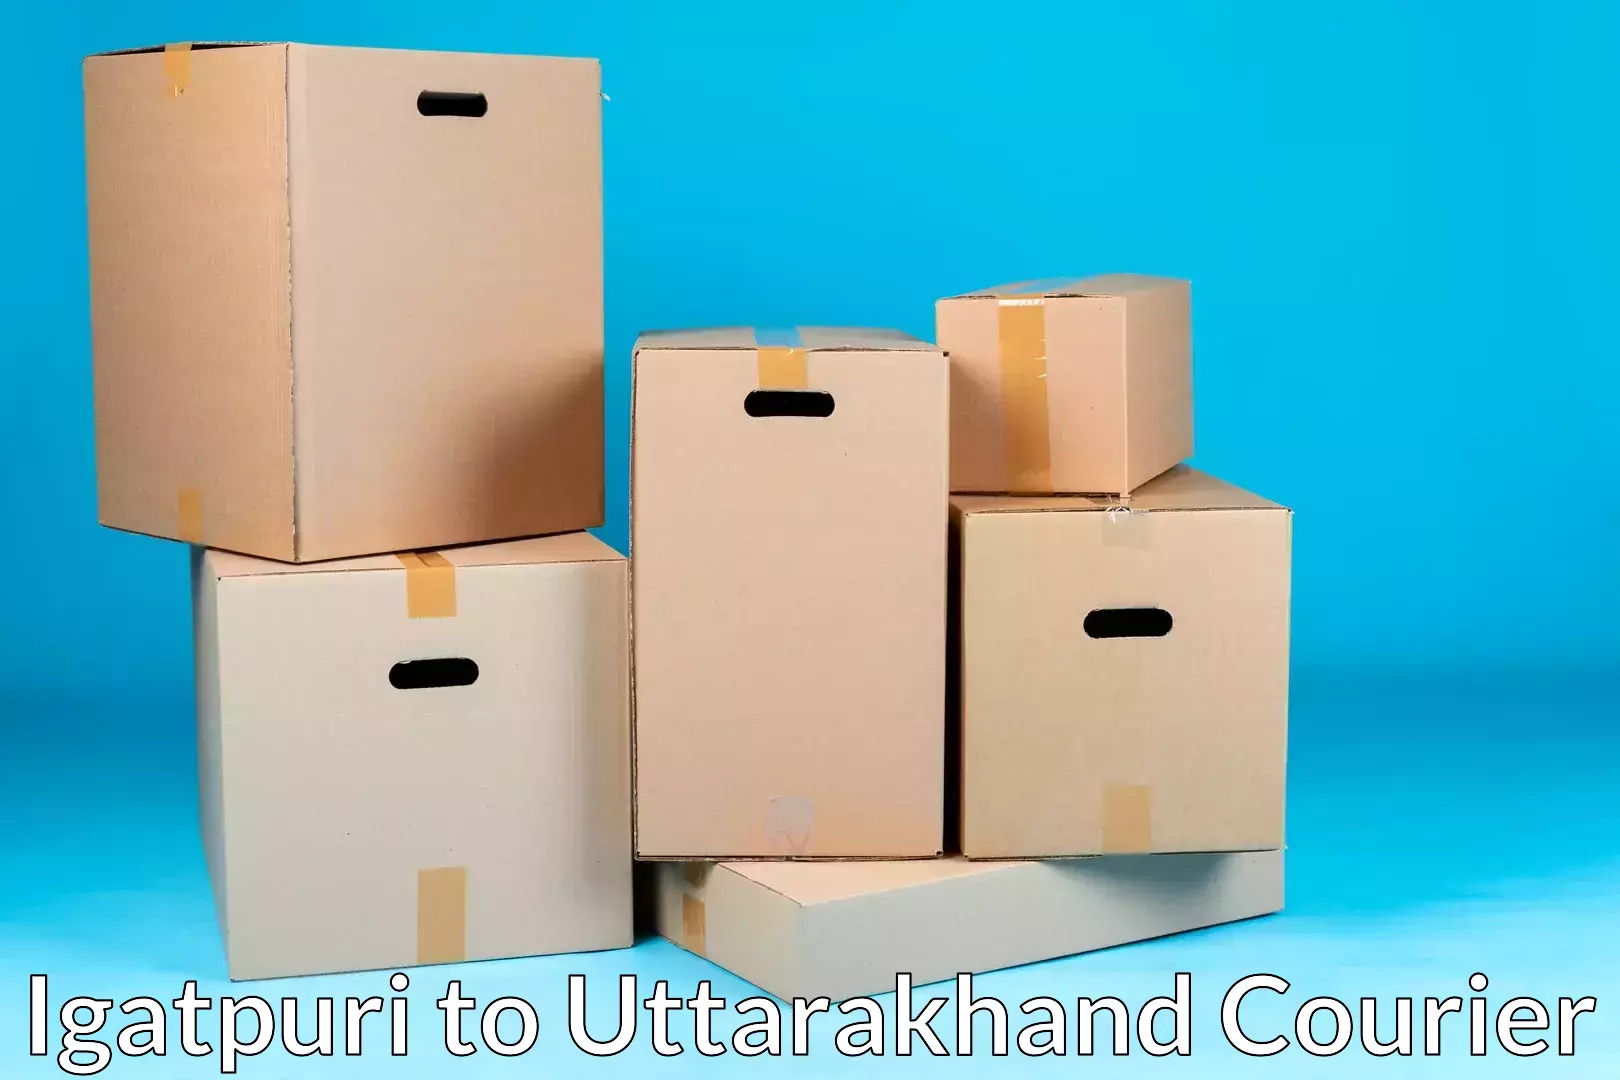 Professional moving assistance in Igatpuri to NIT Garhwal